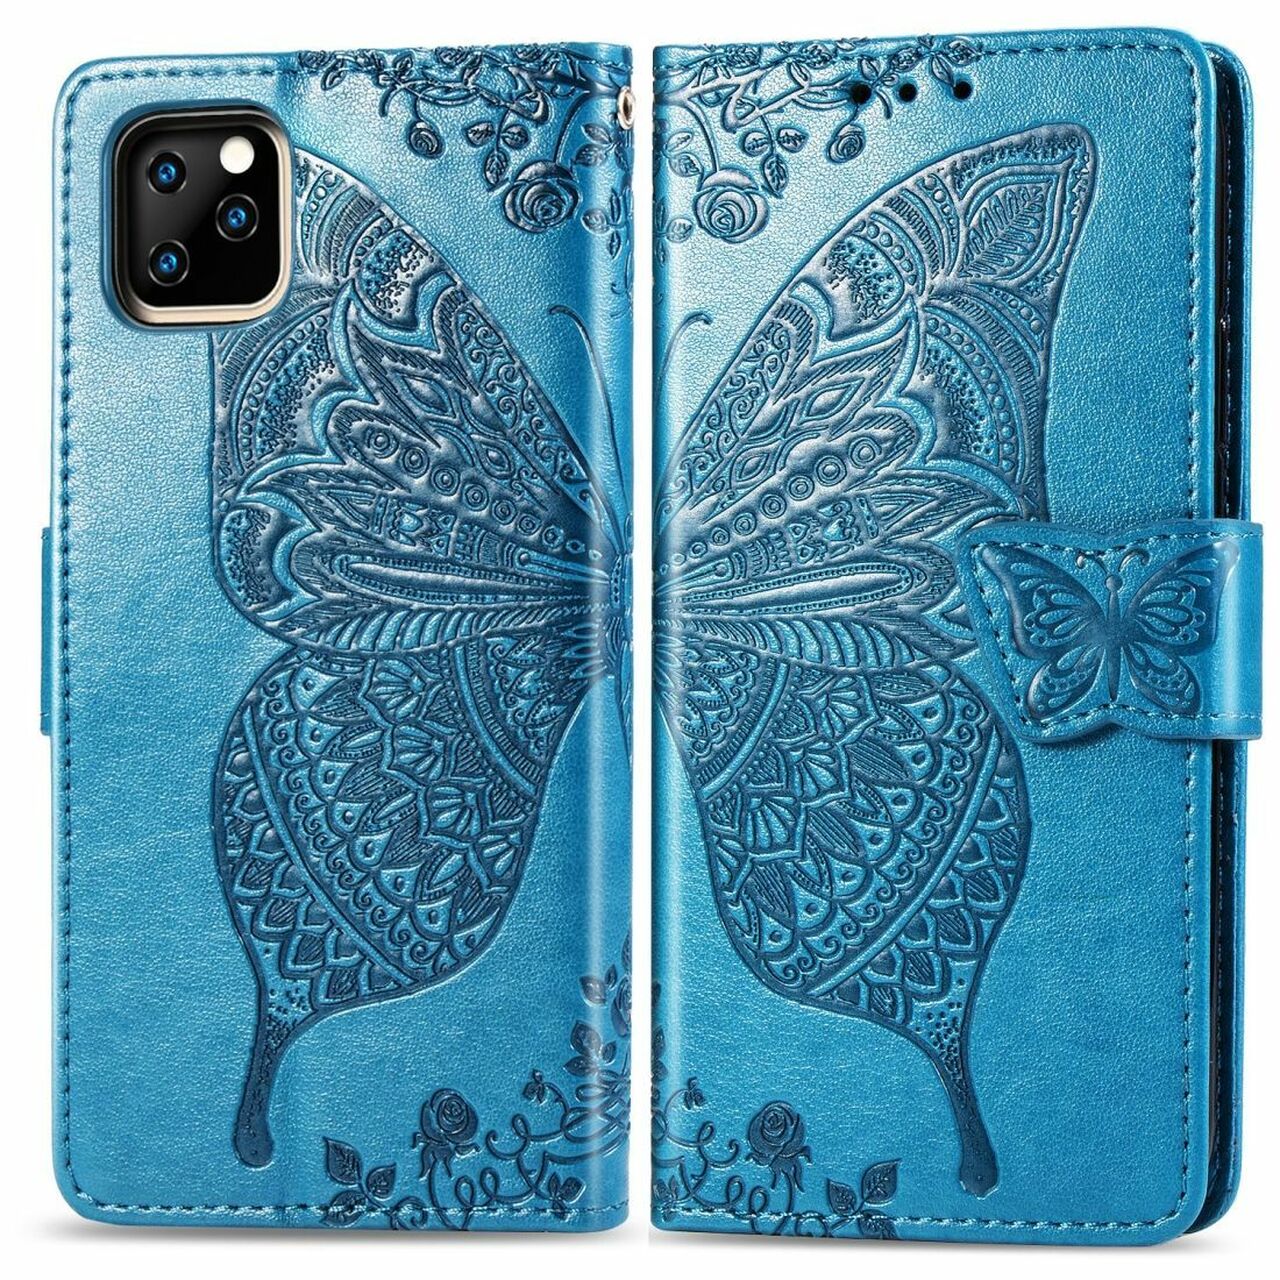 Butterfly Embossed Wallet Phone Cases | iCoverLover